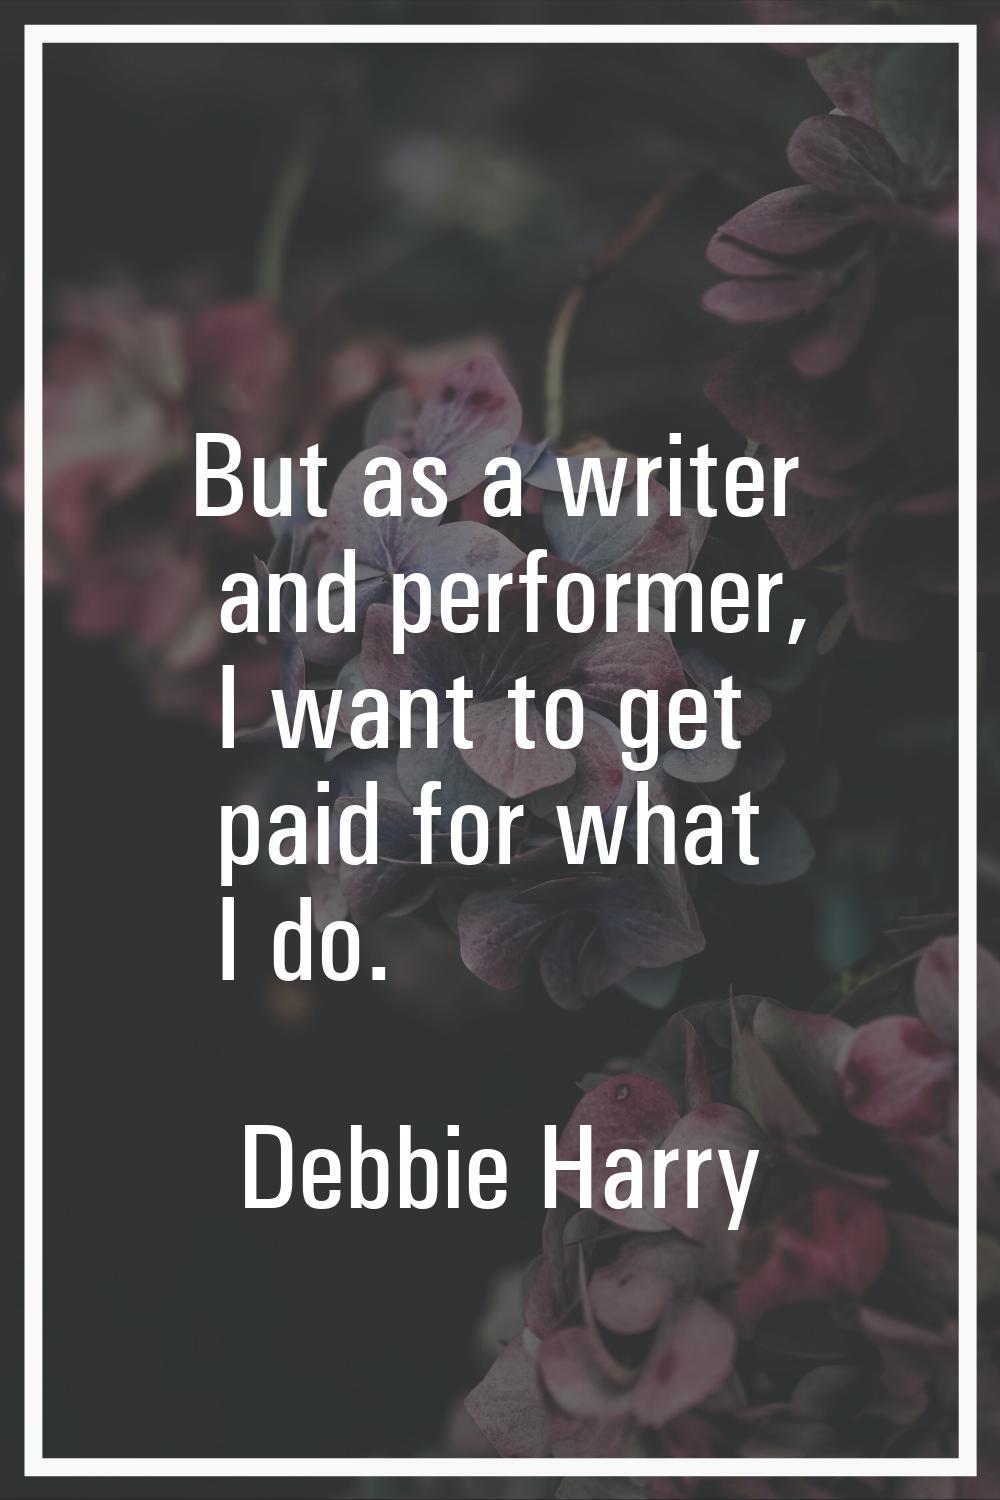 But as a writer and performer, I want to get paid for what I do.